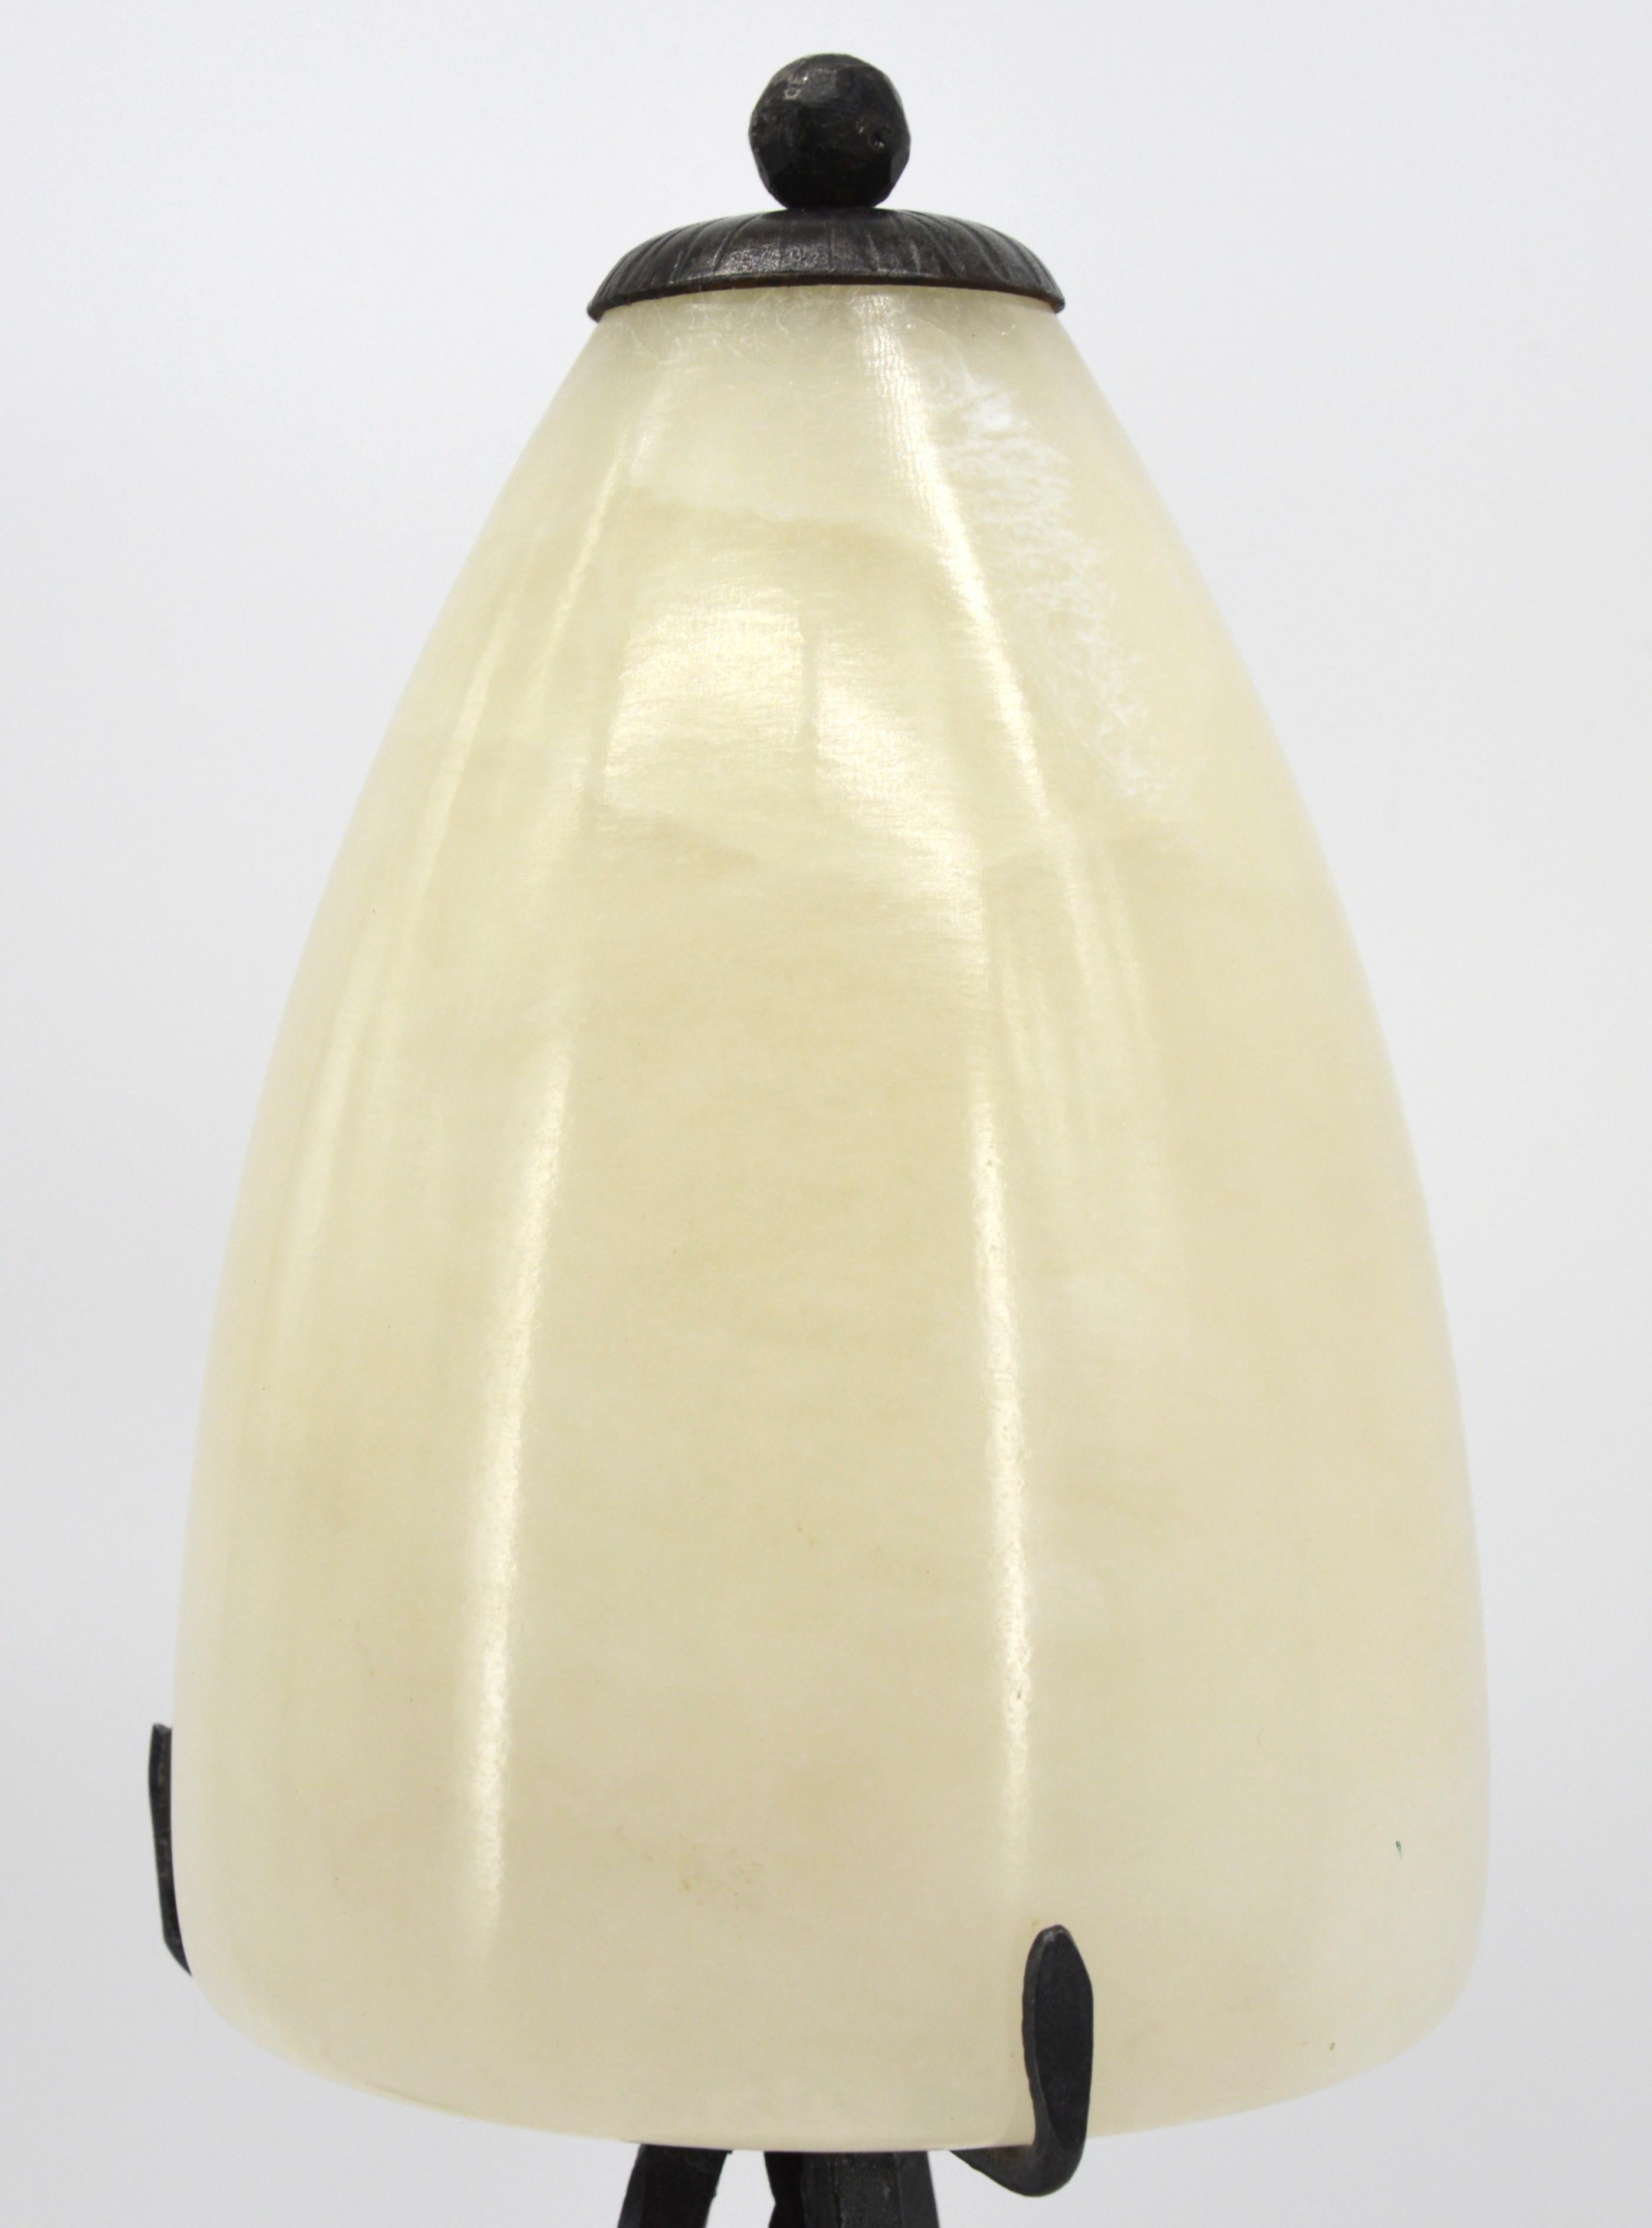 French Art Deco Alabaster Table Lamp, 1920s For Sale 1